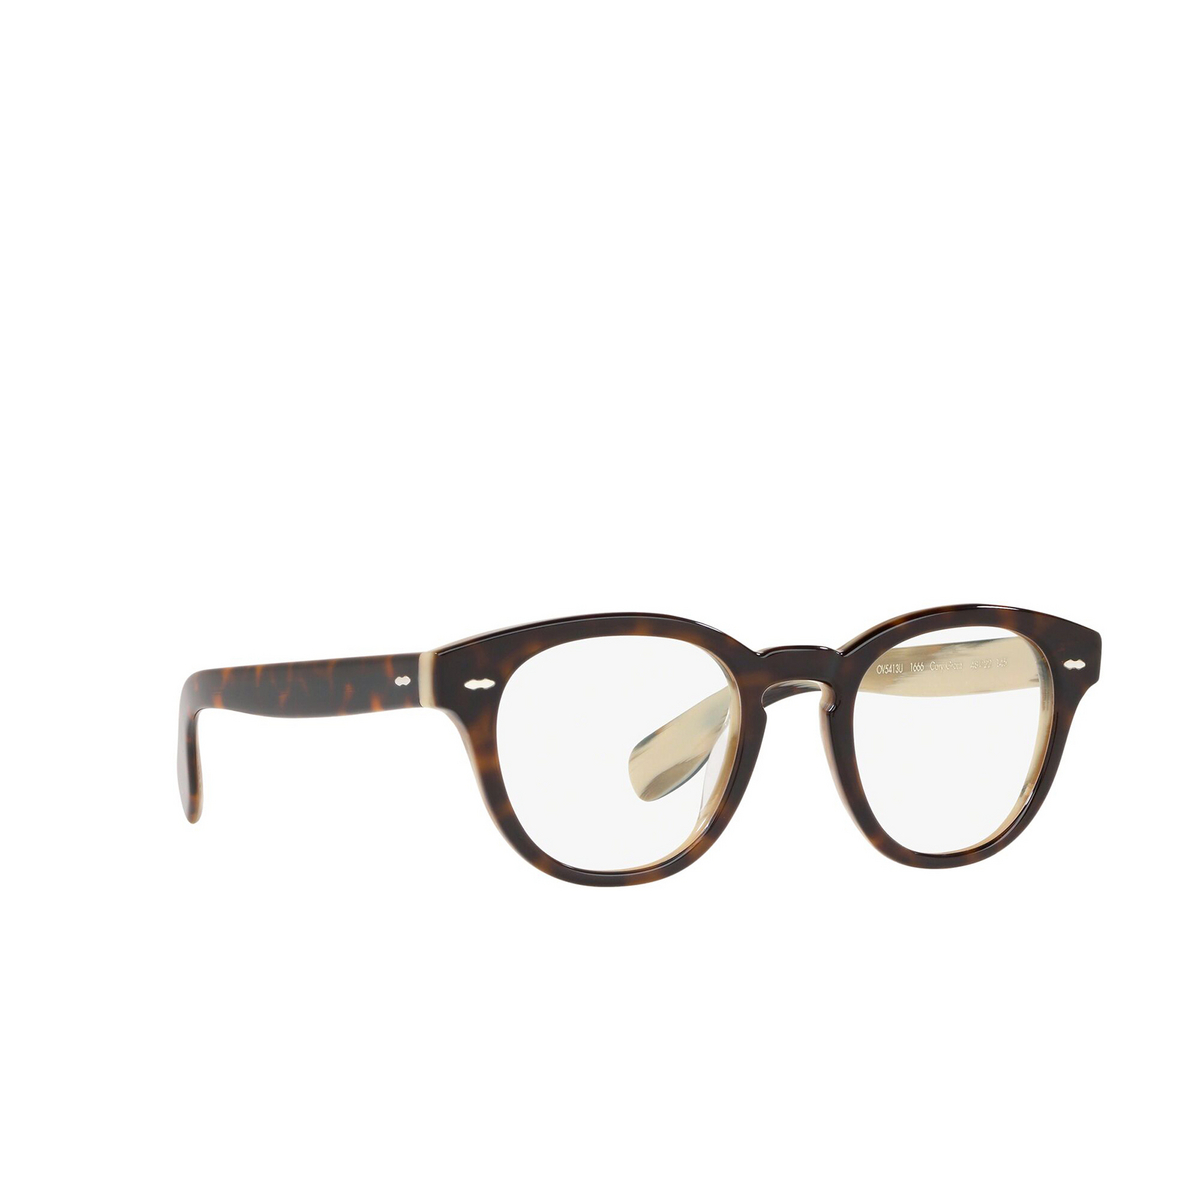 Oliver Peoples CARY GRANT Eyeglasses 1666 362 / Horn - three-quarters view